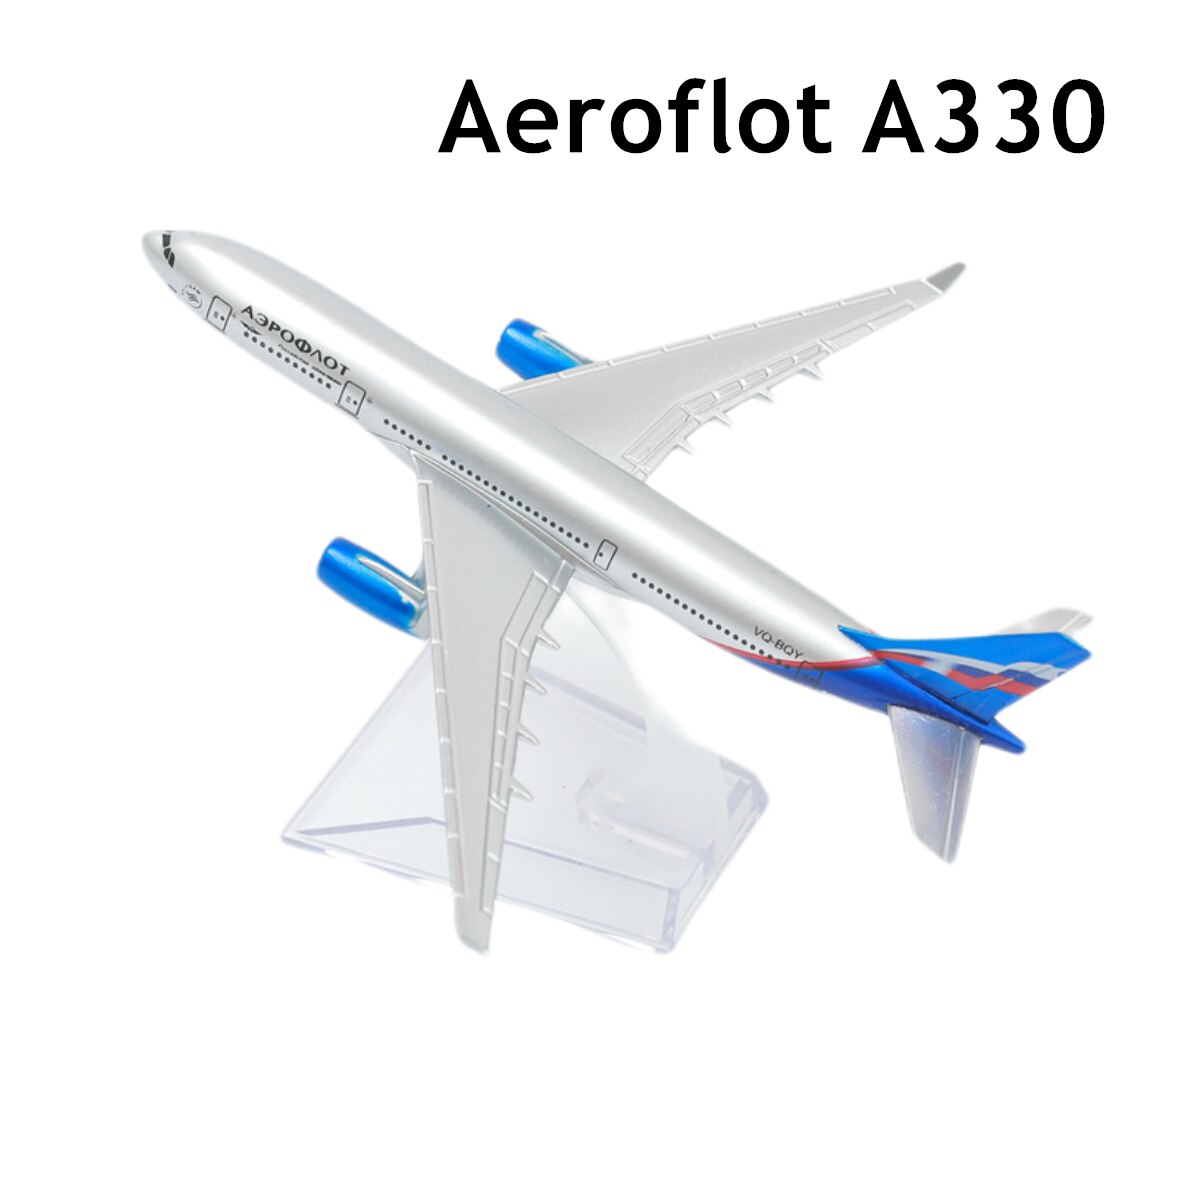 Scale 1:400 Metal Airplane Replica 15cm American President B747 Aircraft Boeing Model Aviation Collectible Diecast Miniature